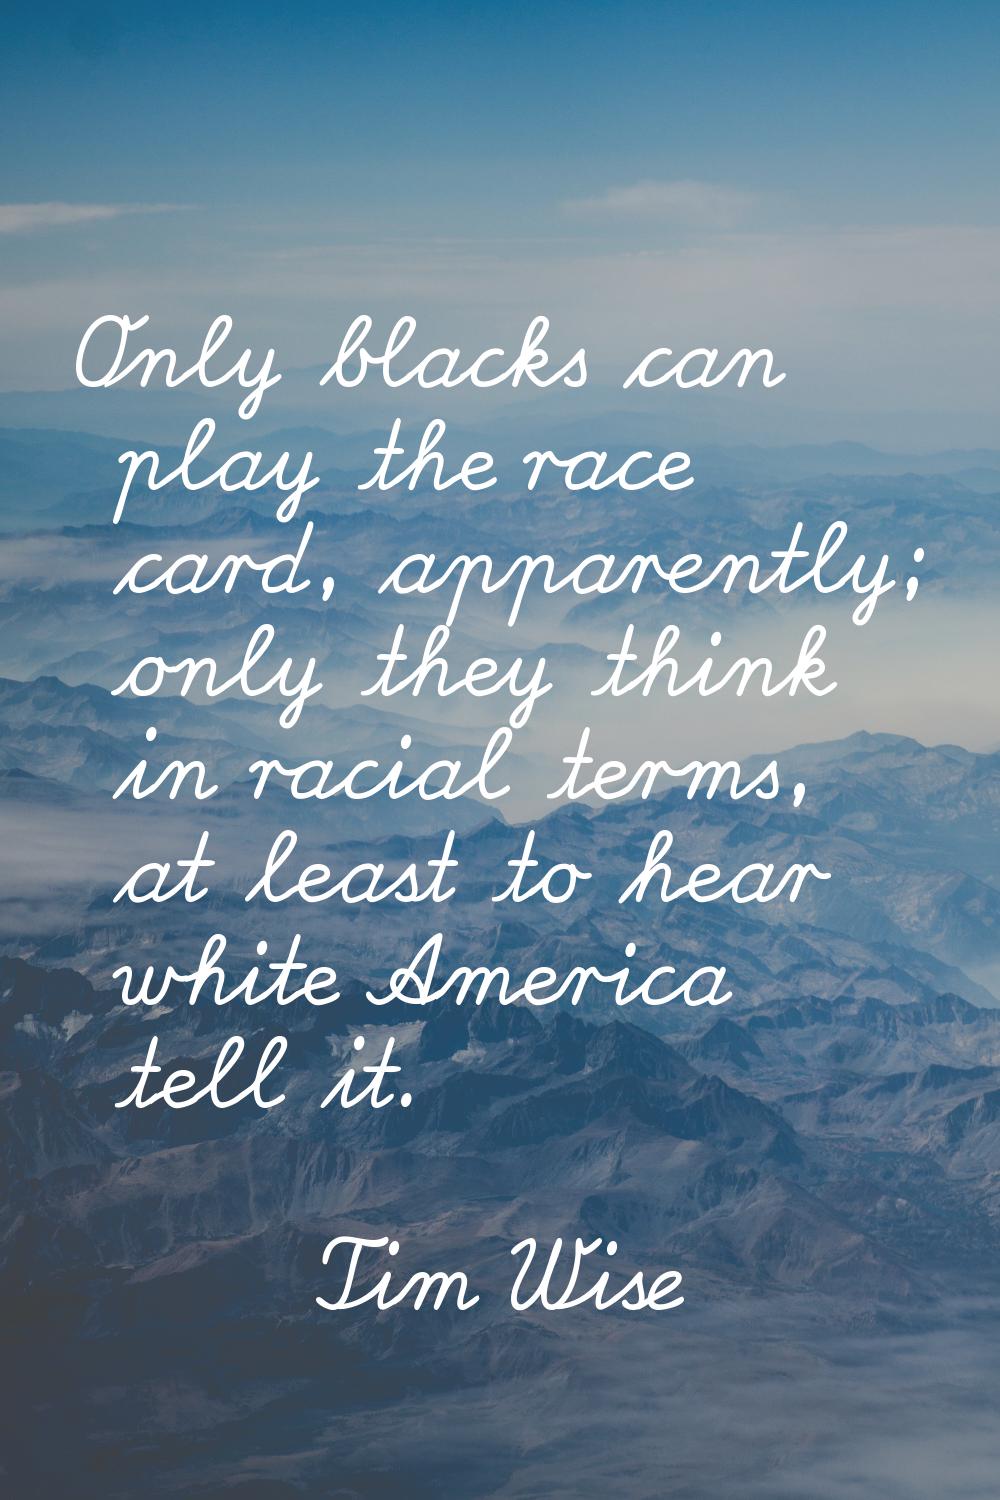 Only blacks can play the race card, apparently; only they think in racial terms, at least to hear w